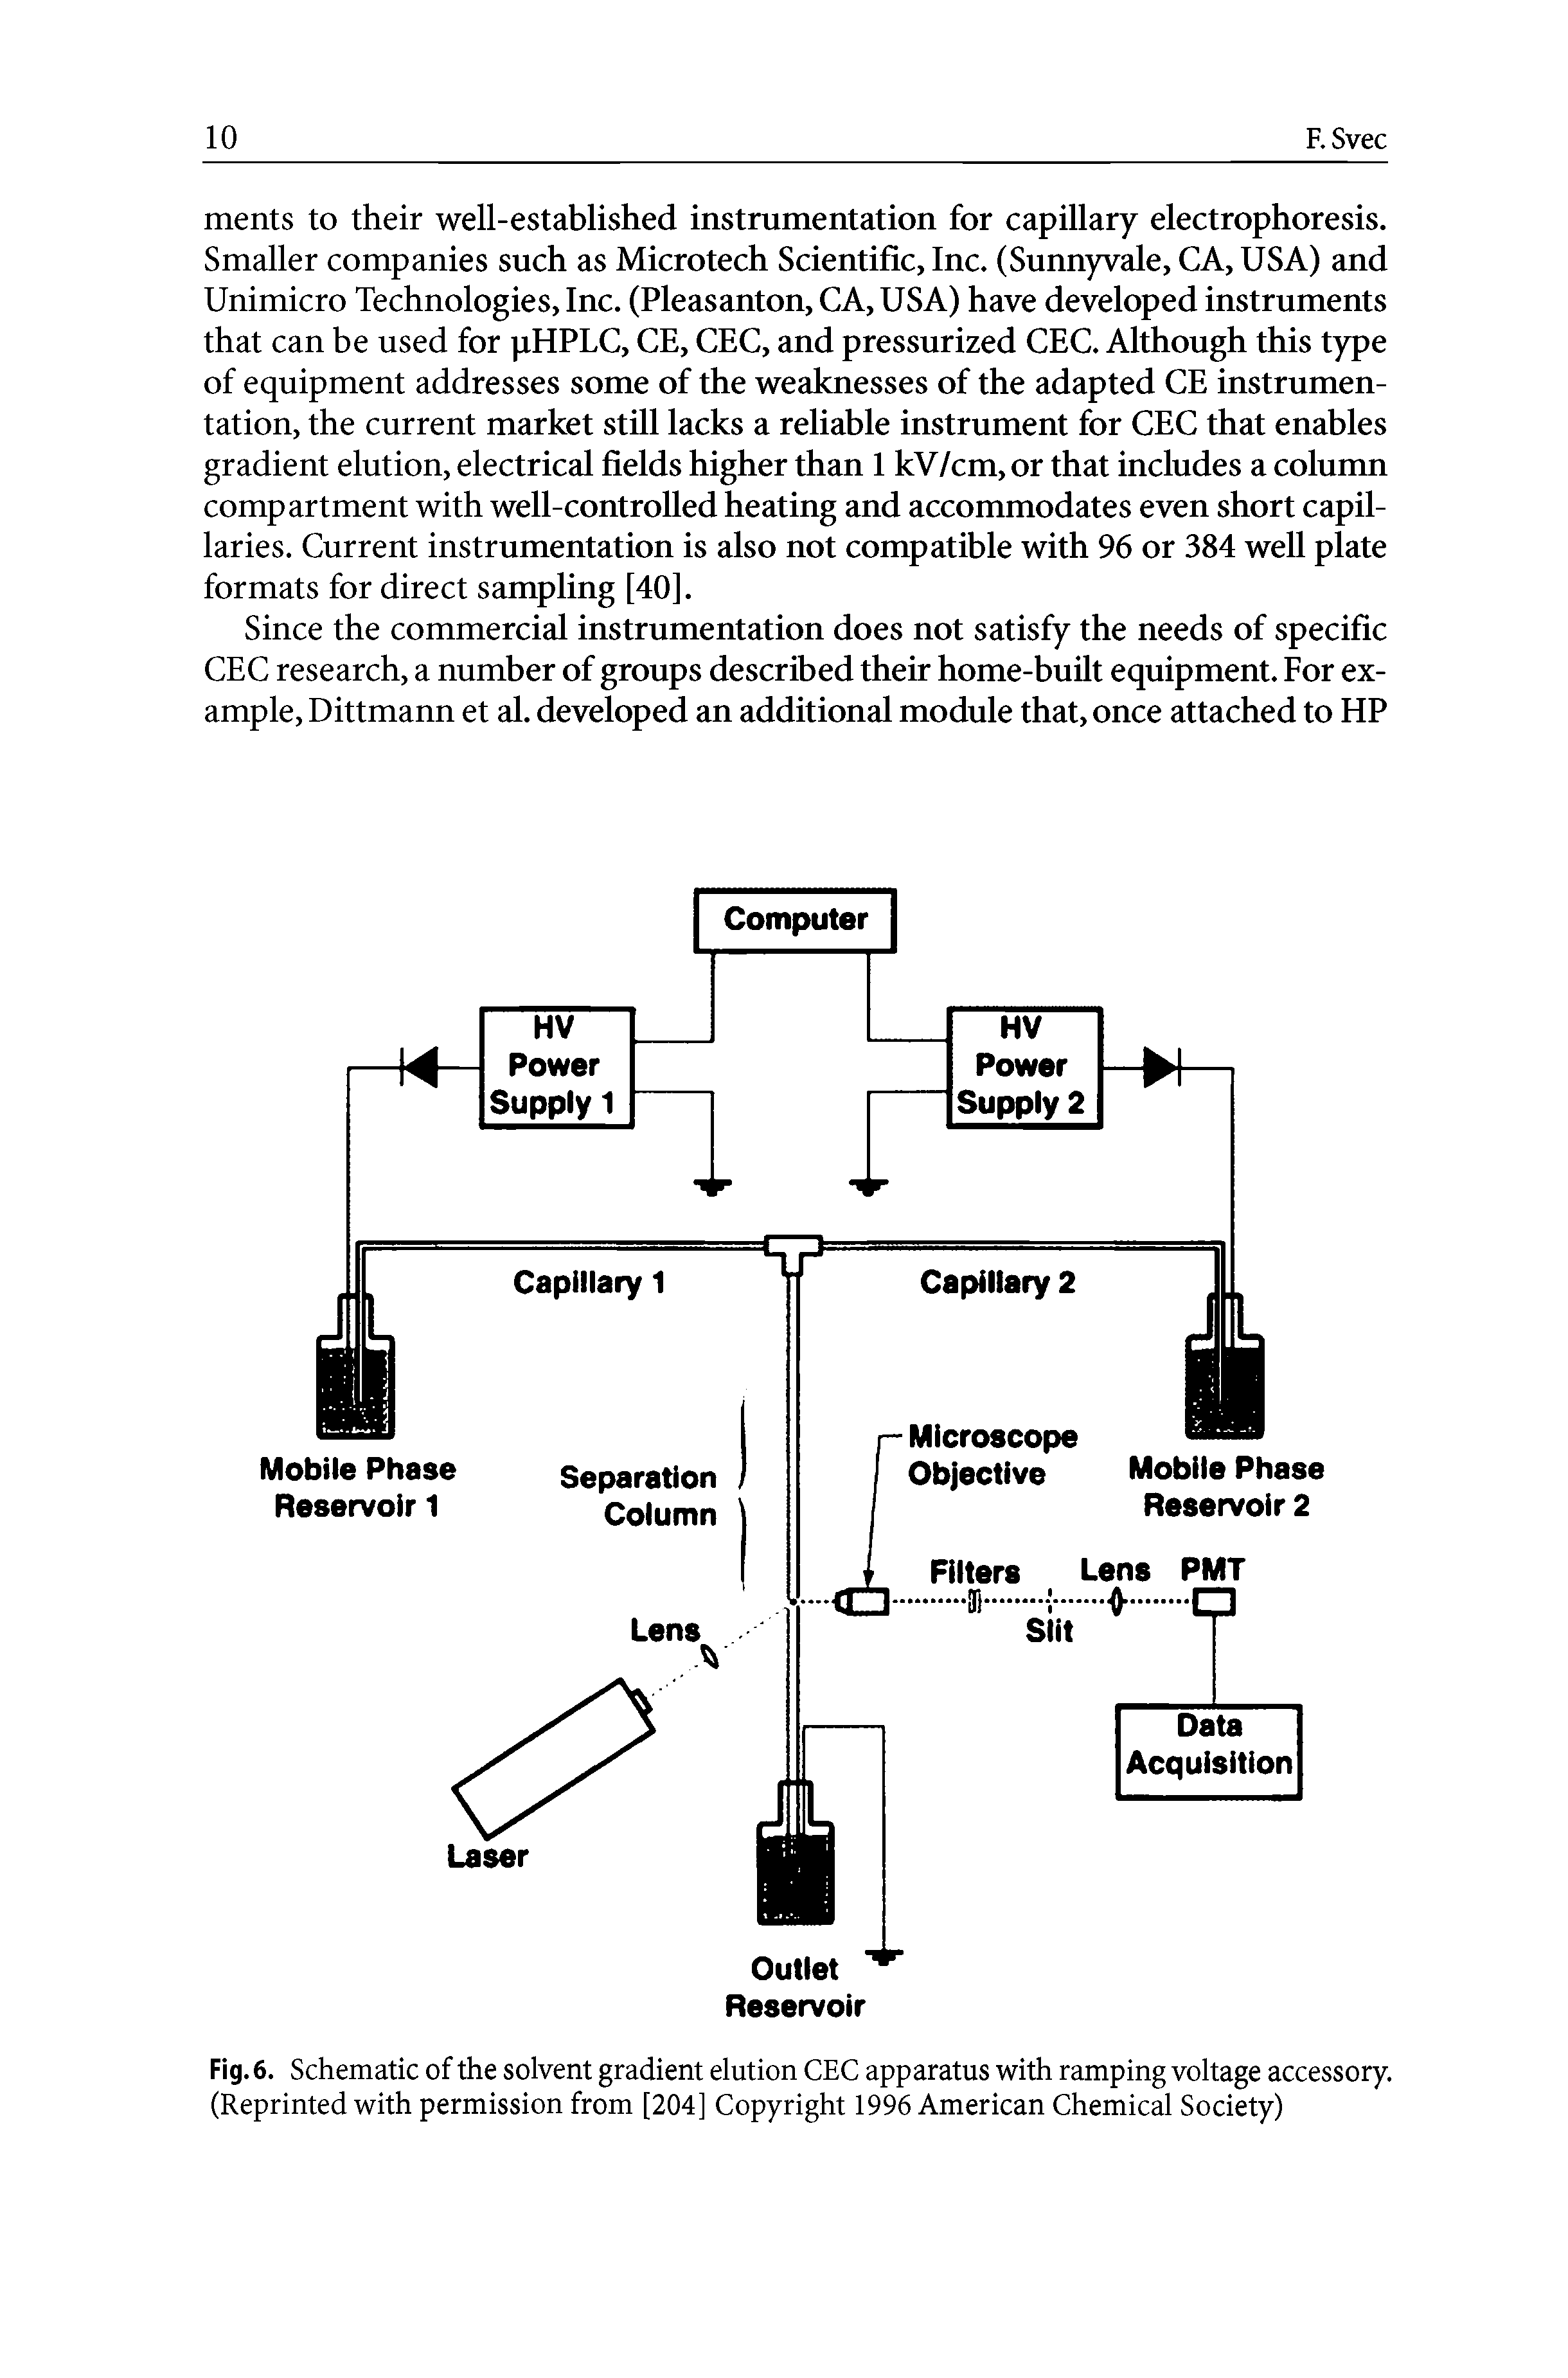 Fig.6. Schematic of the solvent gradient elution CEC apparatus with ramping voltage accessory. (Reprinted with permission from [204] Copyright 1996 American Chemical Society)...